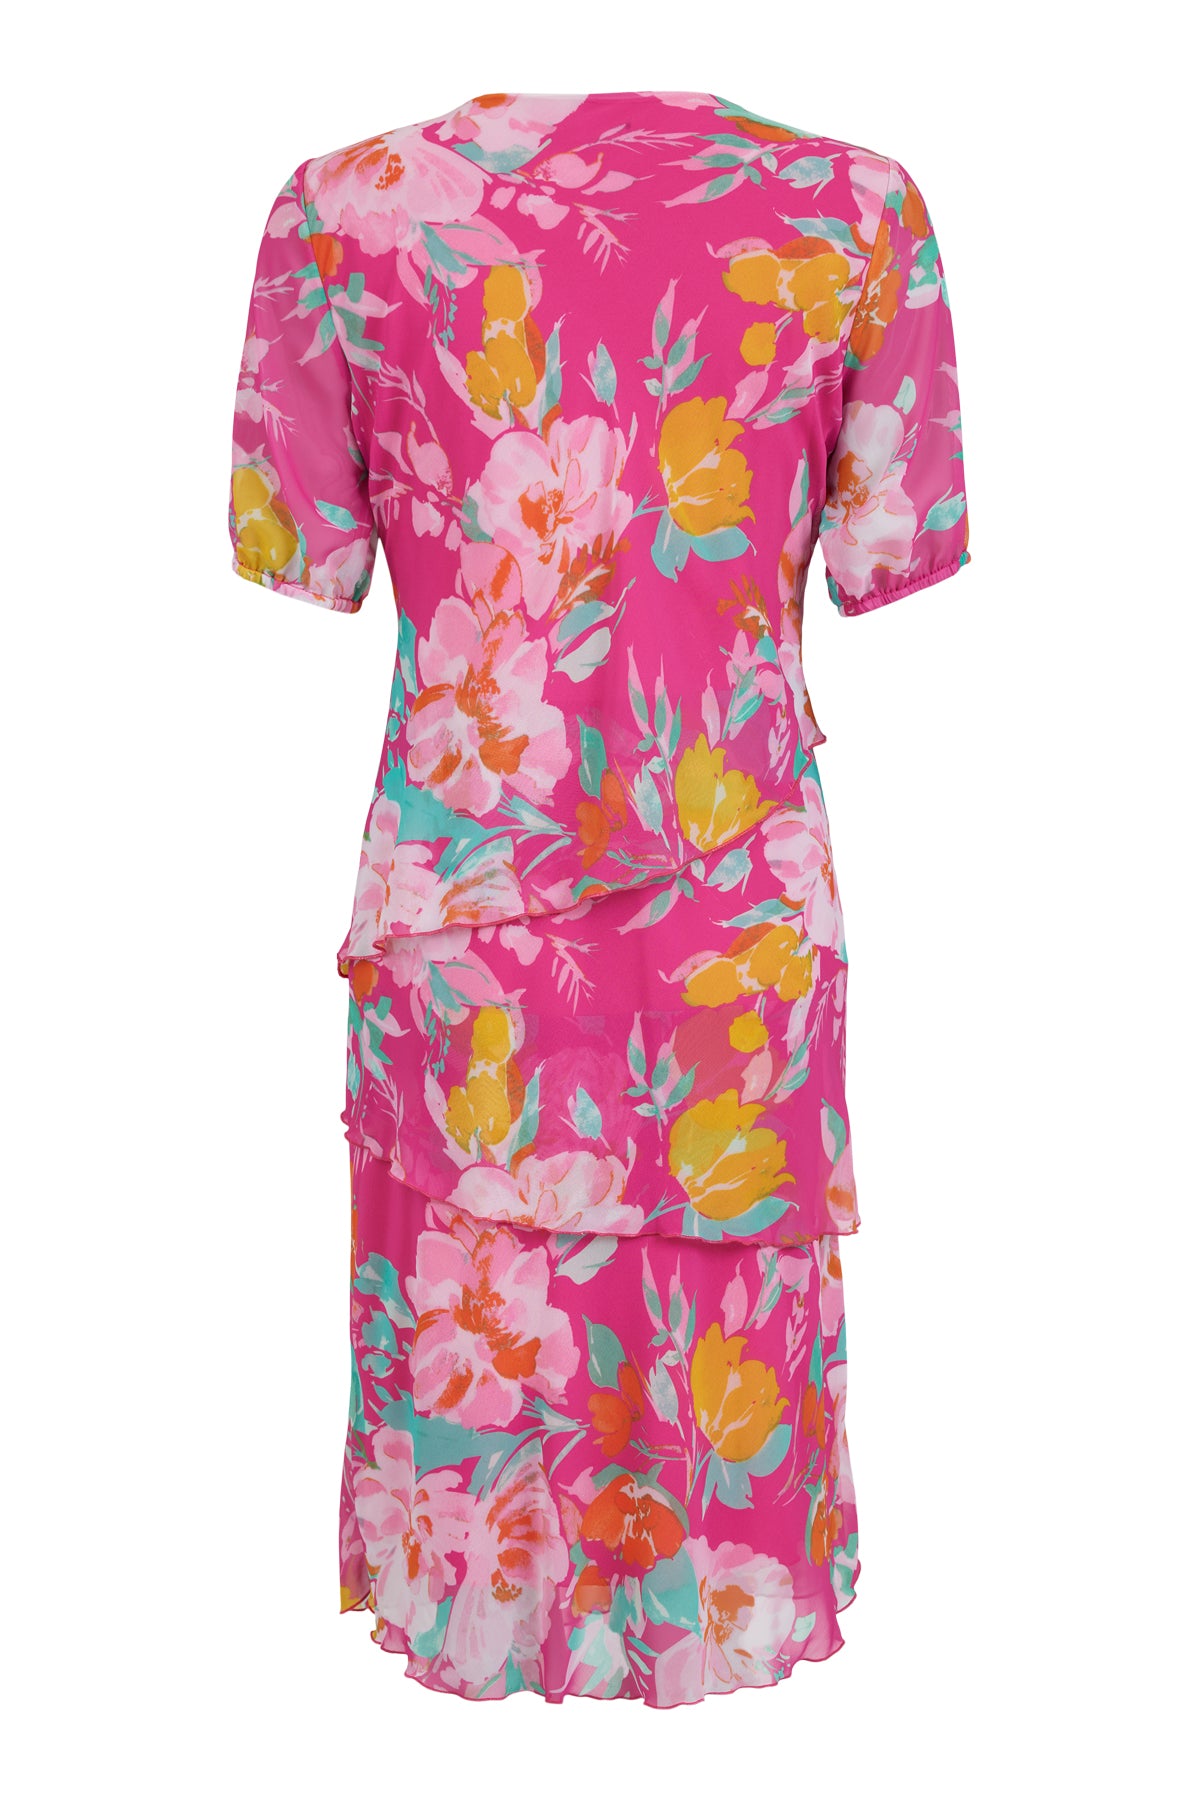 Pink Dress Multi-Coloured Flower Print With Elasticated Cap Sleeve & Tiered Detailing